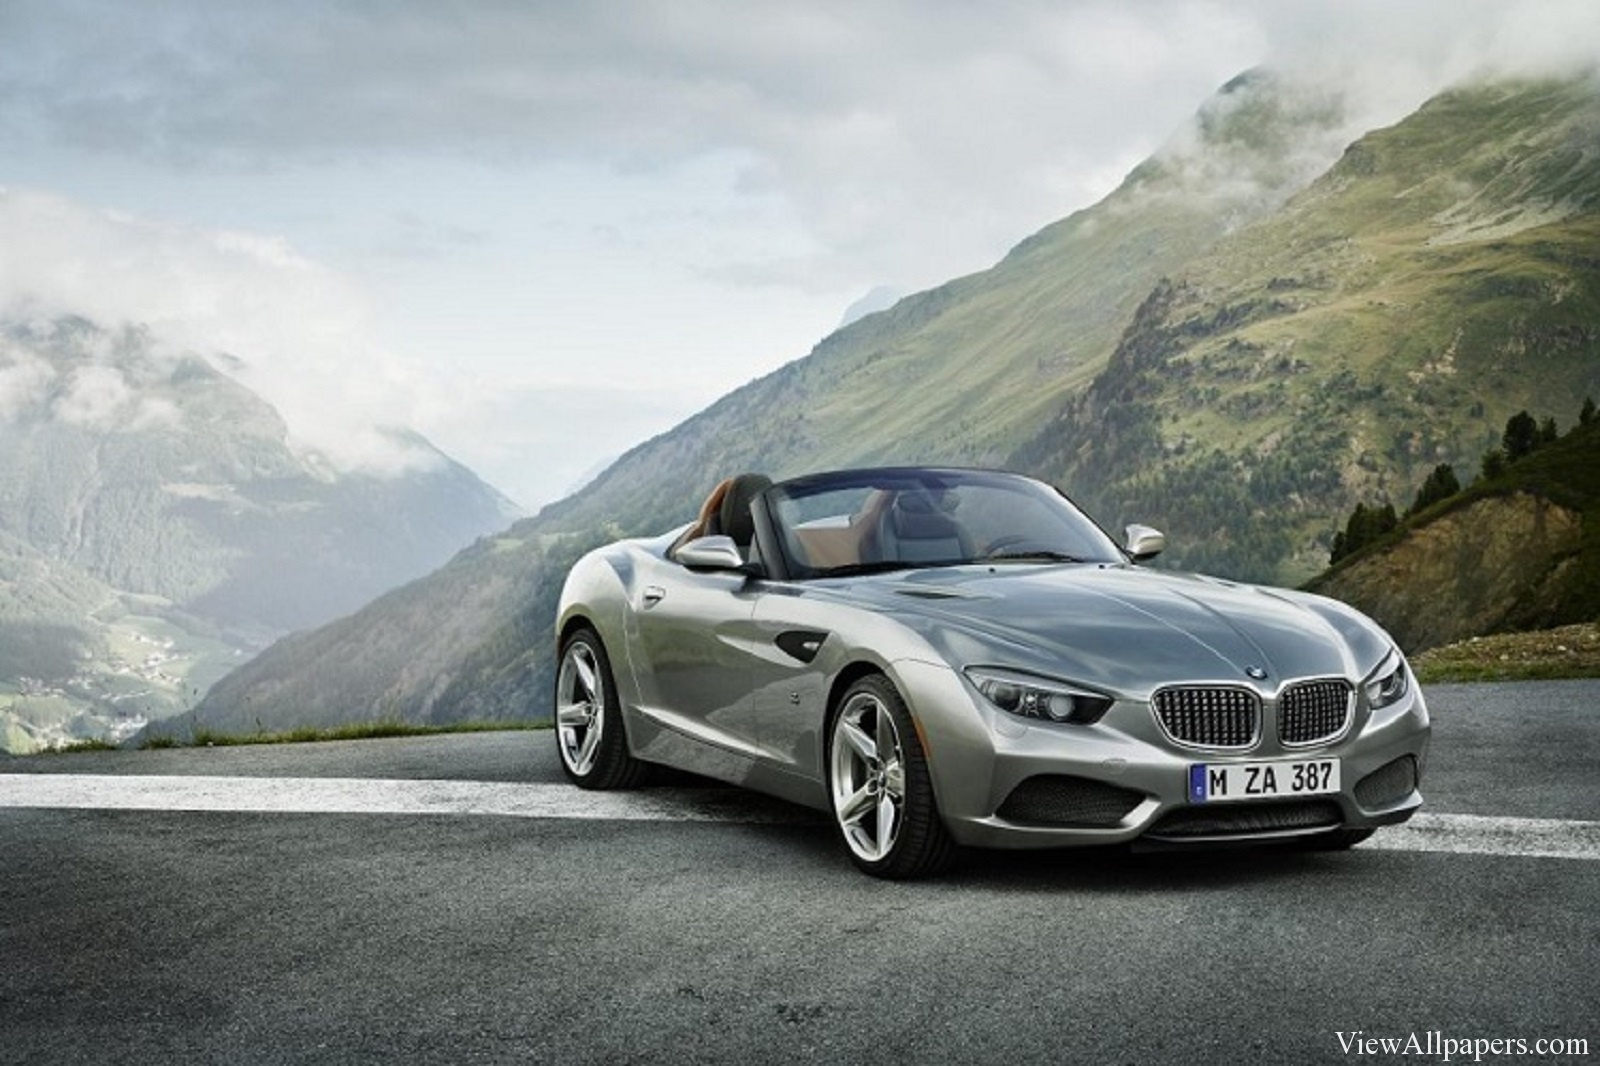 Free Download 2016 Bmw Z4 High Resolution Wallpaper Download 2016 Bmw Z4 For 1600x1066 For Your Desktop Mobile Tablet Explore 48 Car Wallpapers 2016 Full Hd 1920 1080p Free